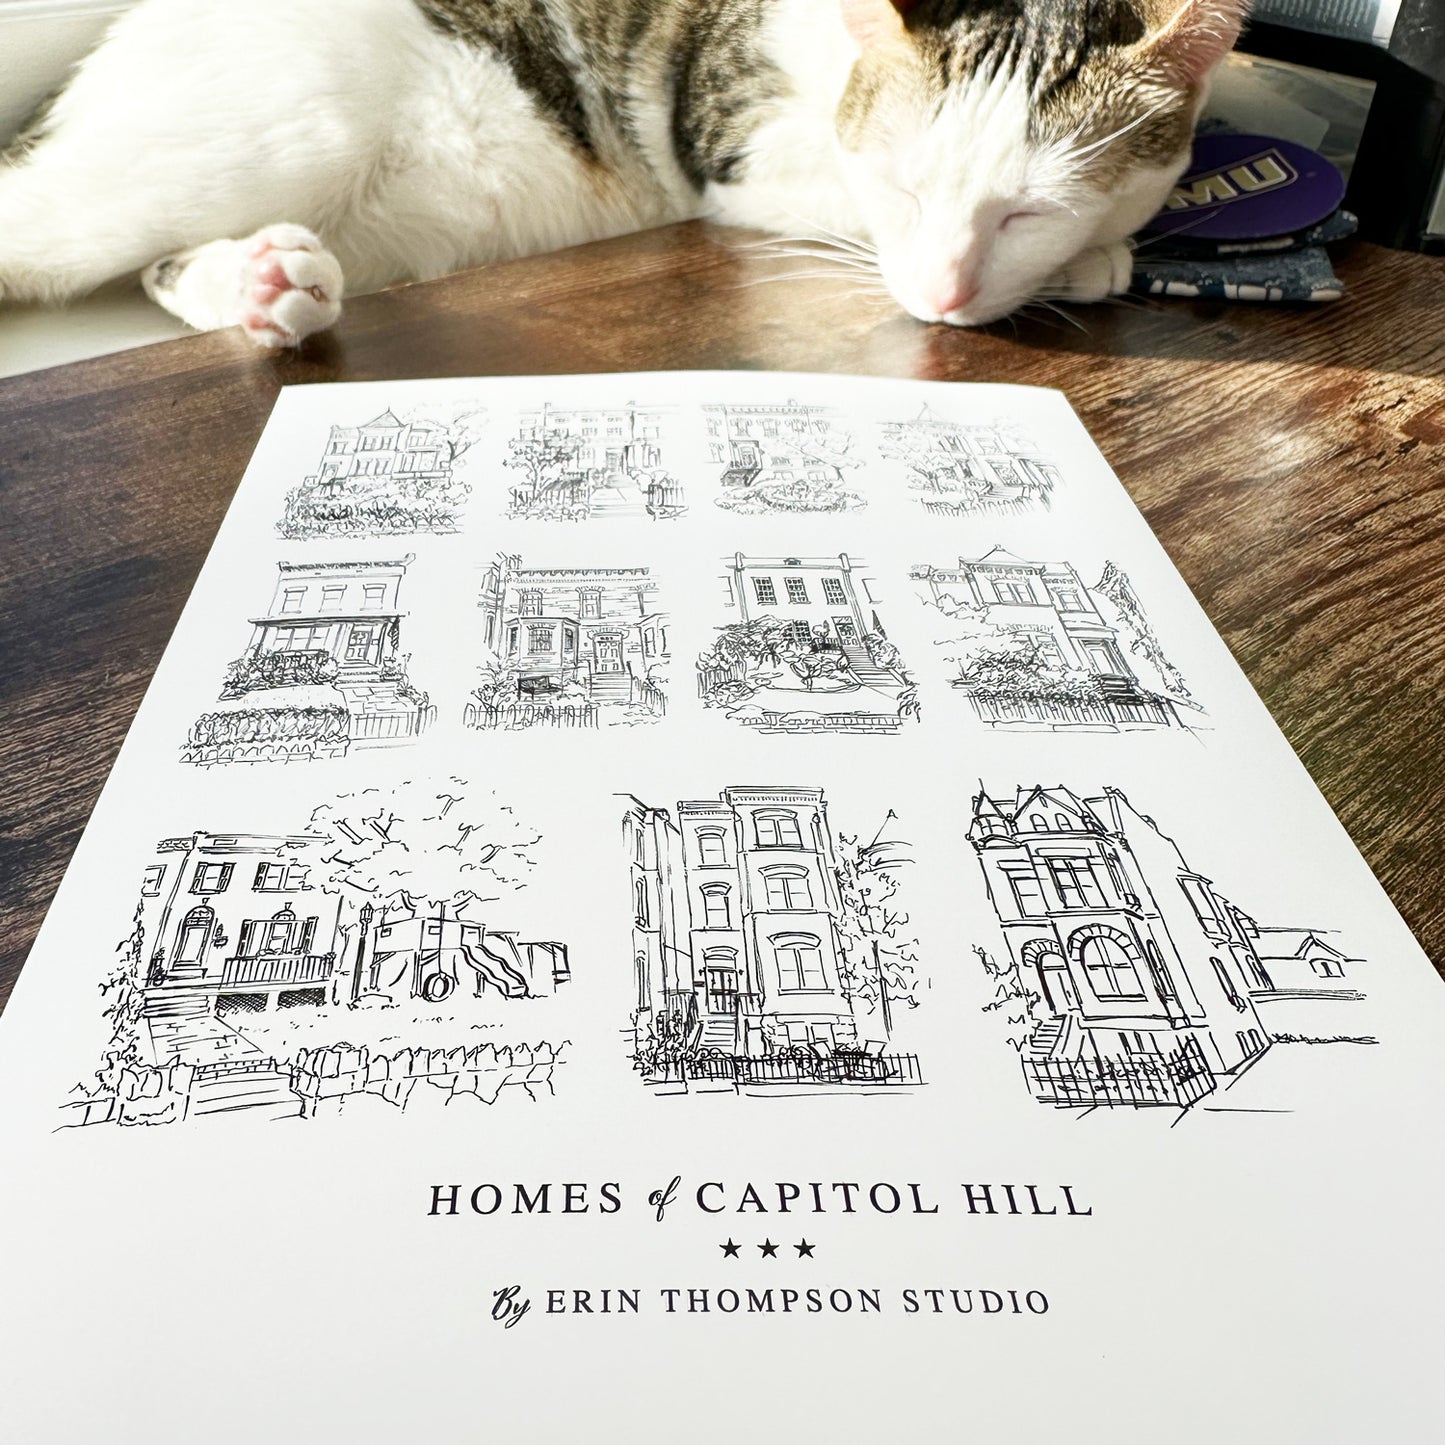 Homes of Capitol Hill (black & white sketches)